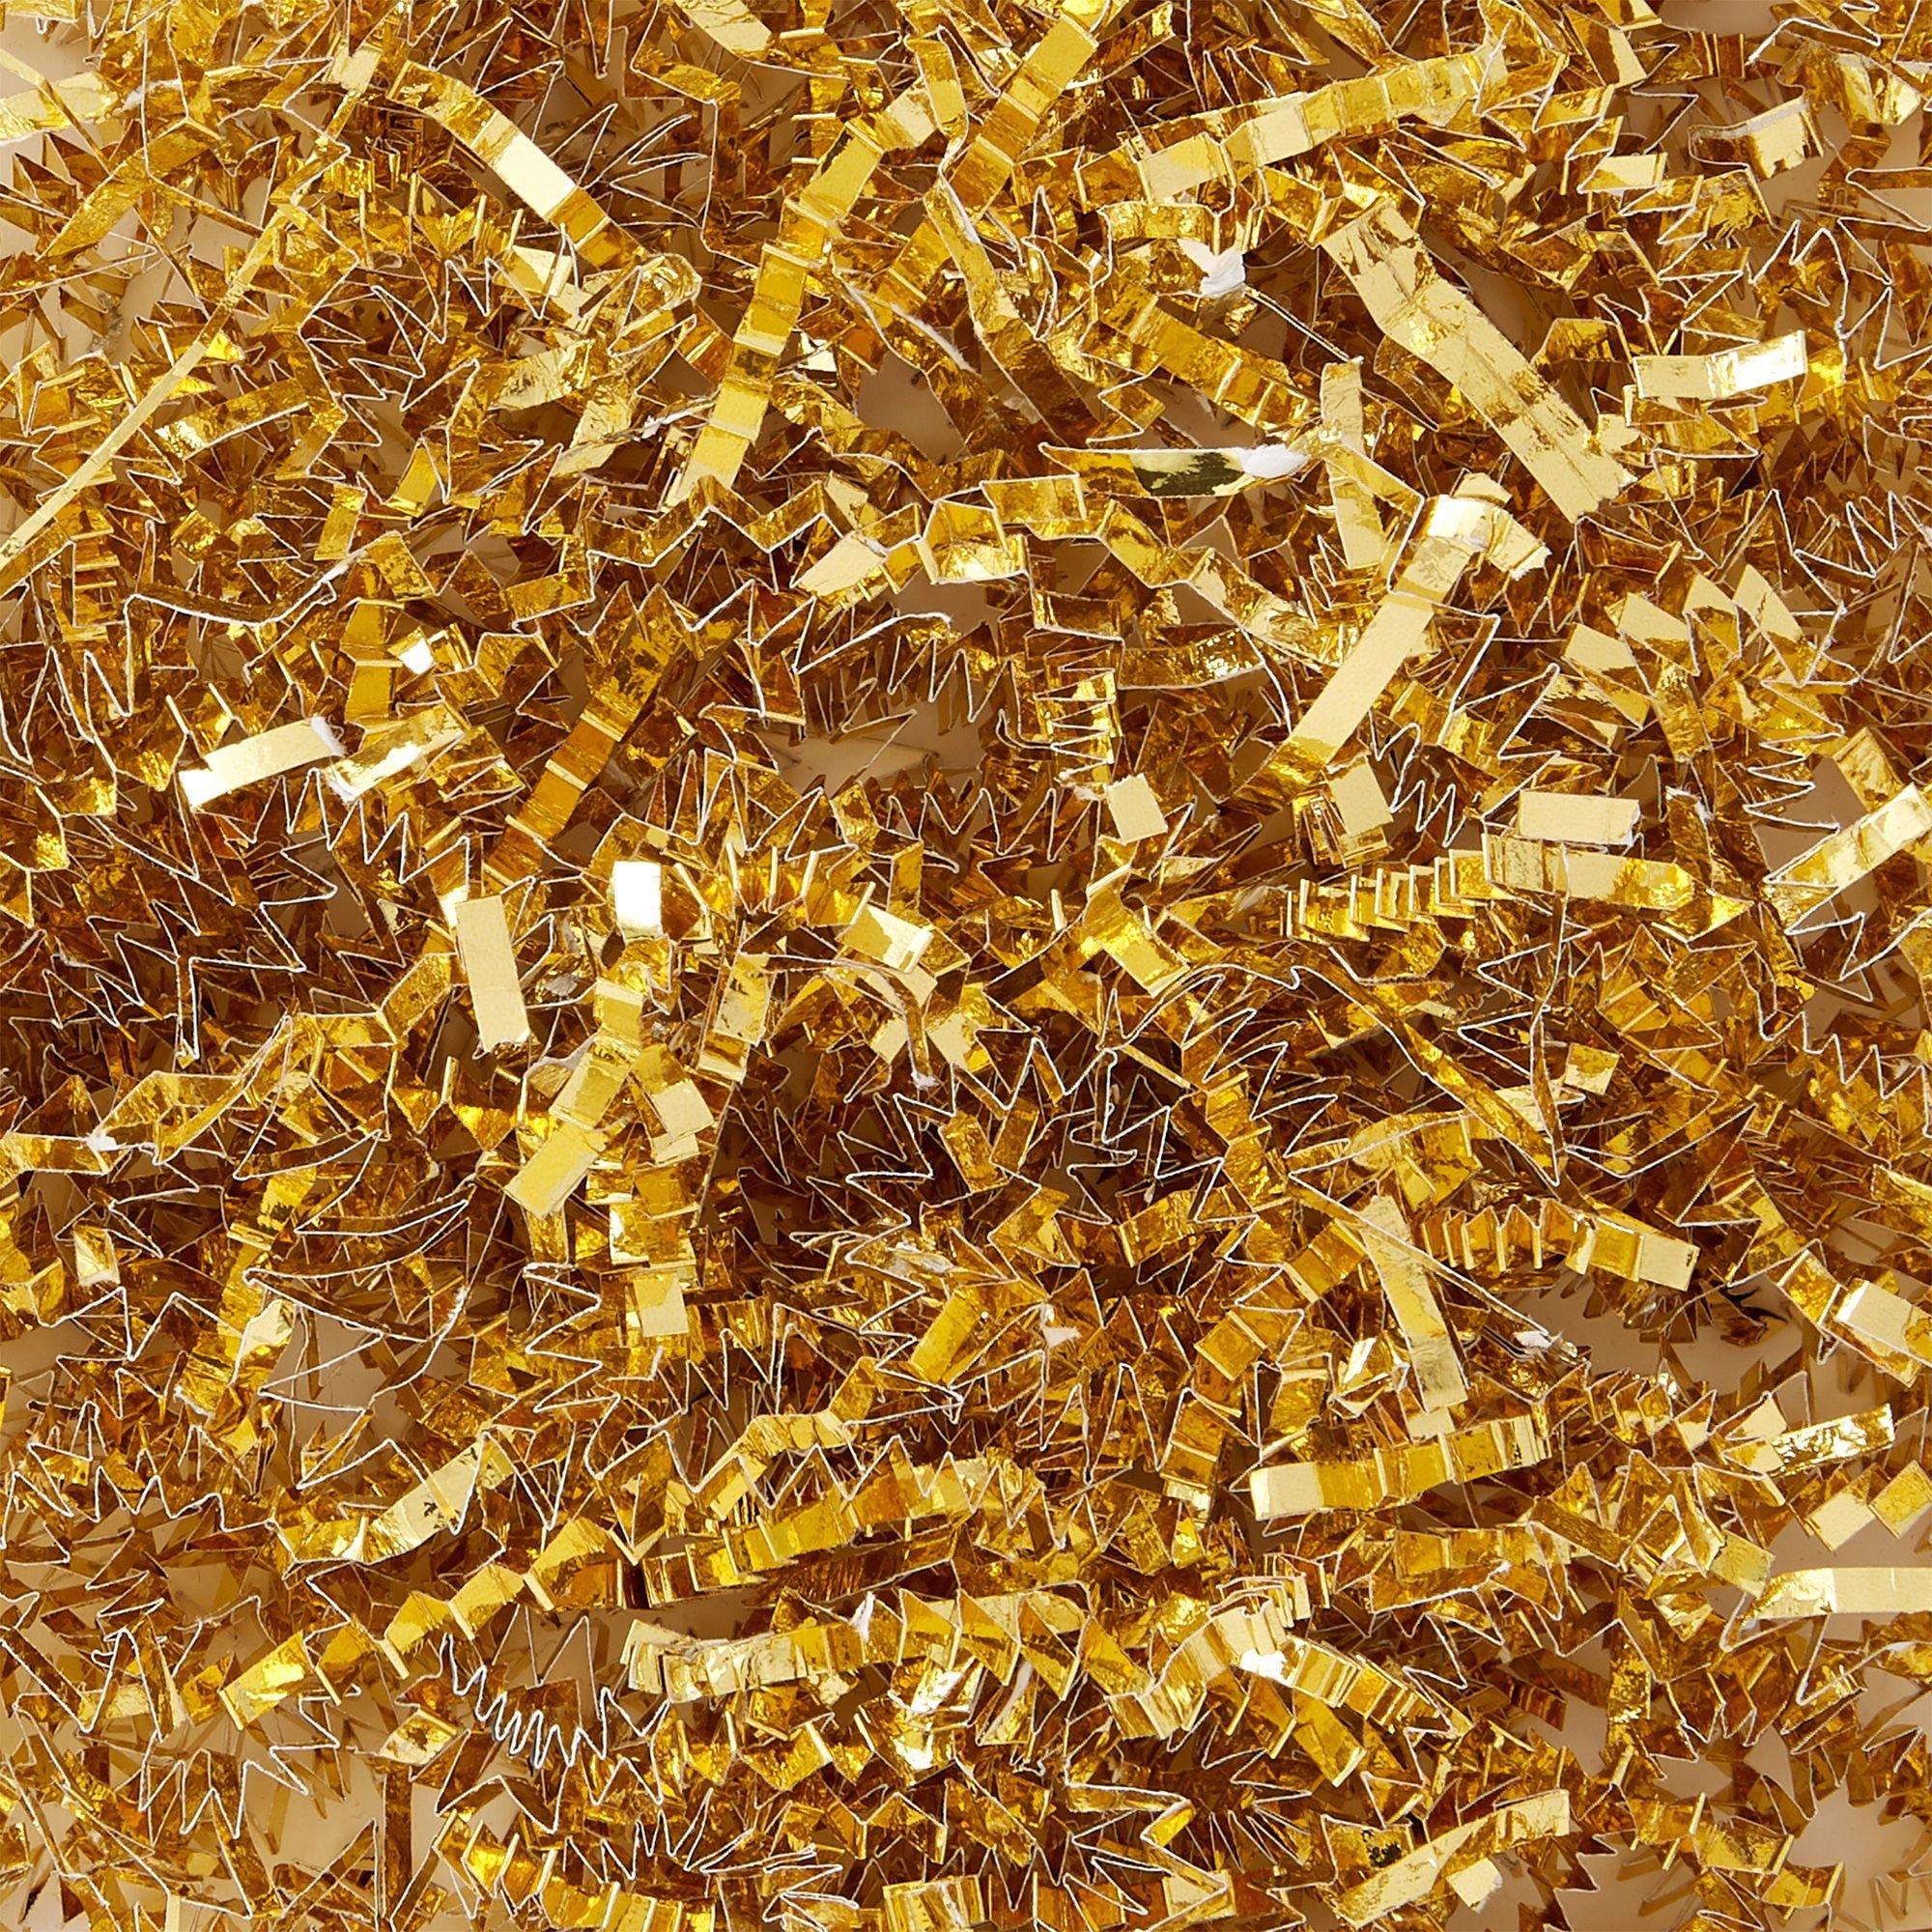 Yellow Crinkle Paper Shreds 2oz